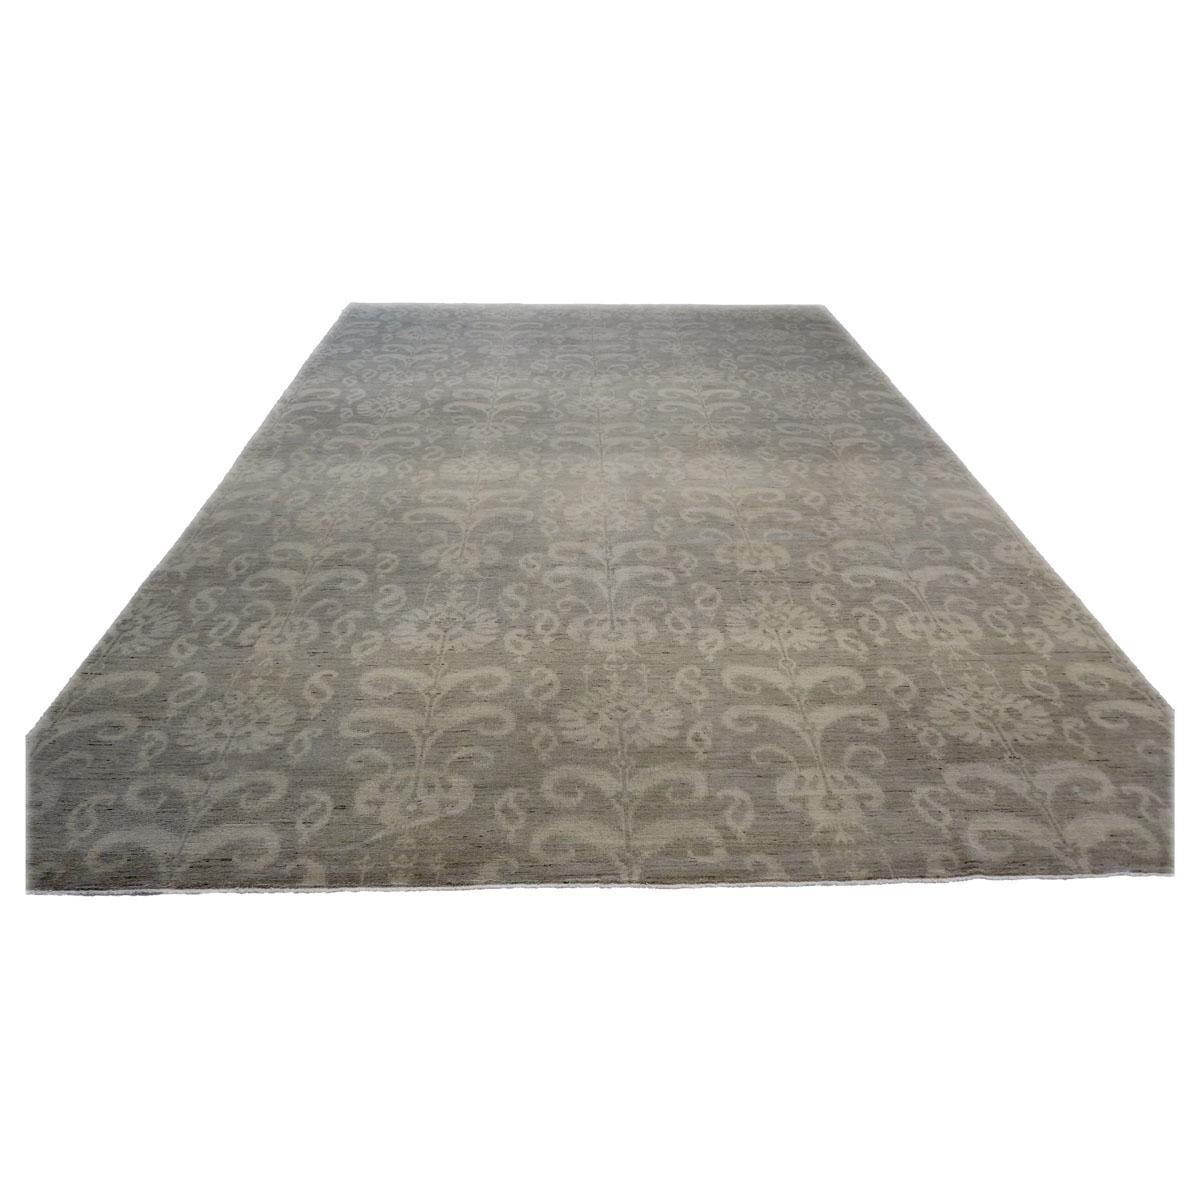 This 21st Century Afghan Ikat Wool Handwoven 9x12 Grey Carpet was made with 100% hand twisted wool fibers which were vegetable dyed with subtle colors. The weaver intentionally made the borderless rug so it can be universally placed in a room